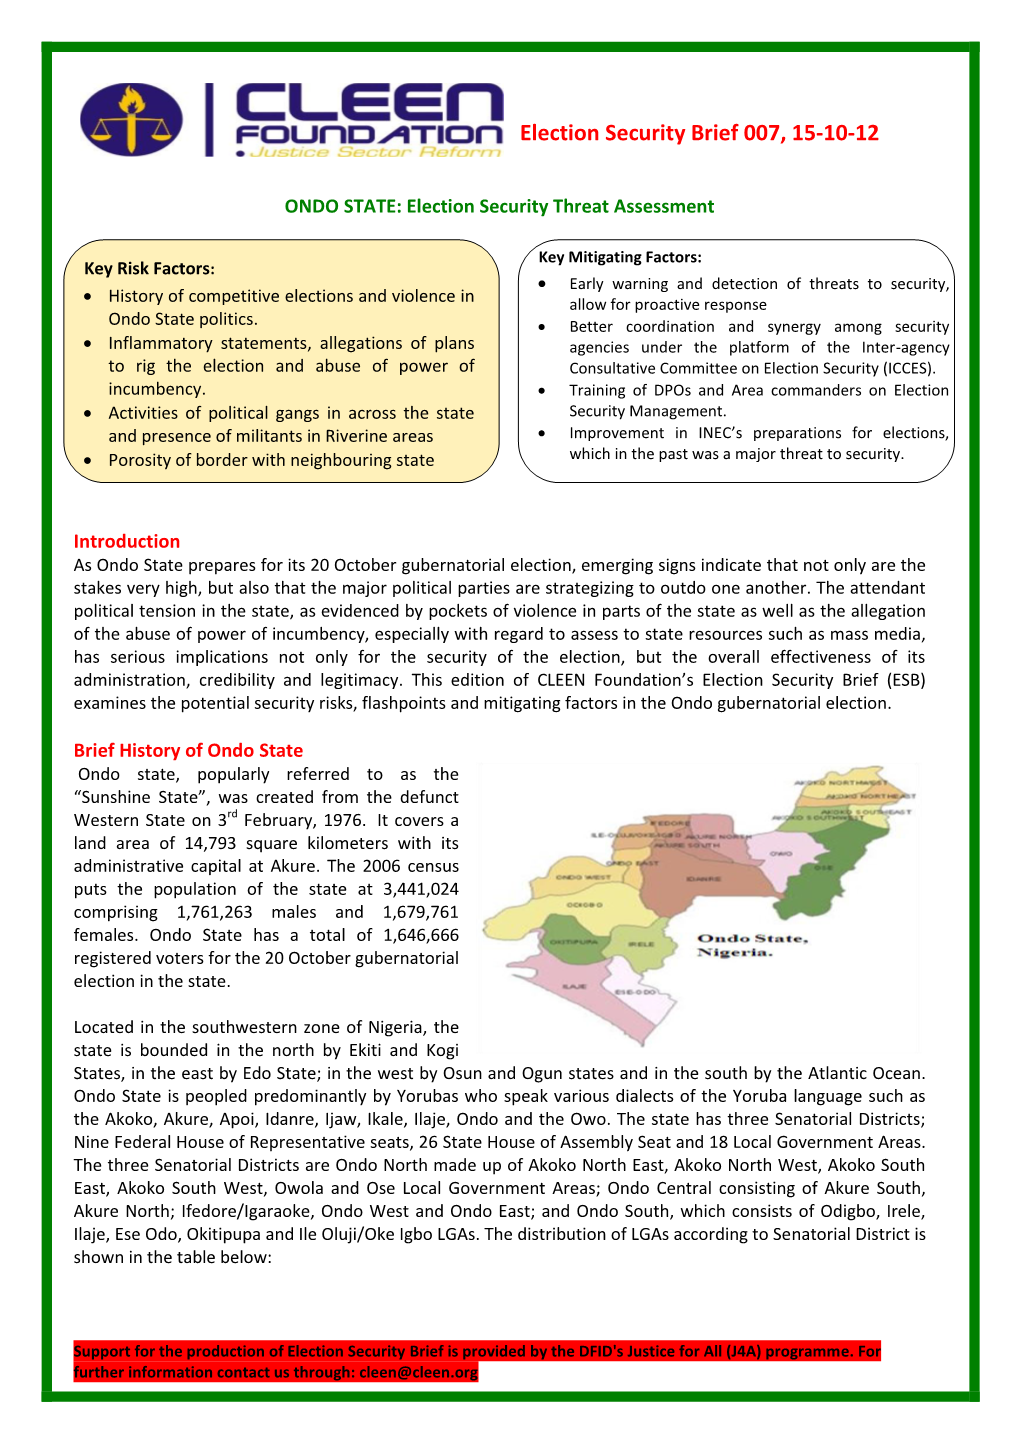 2012 Ondo State: Election Security Threat Assessment Brief